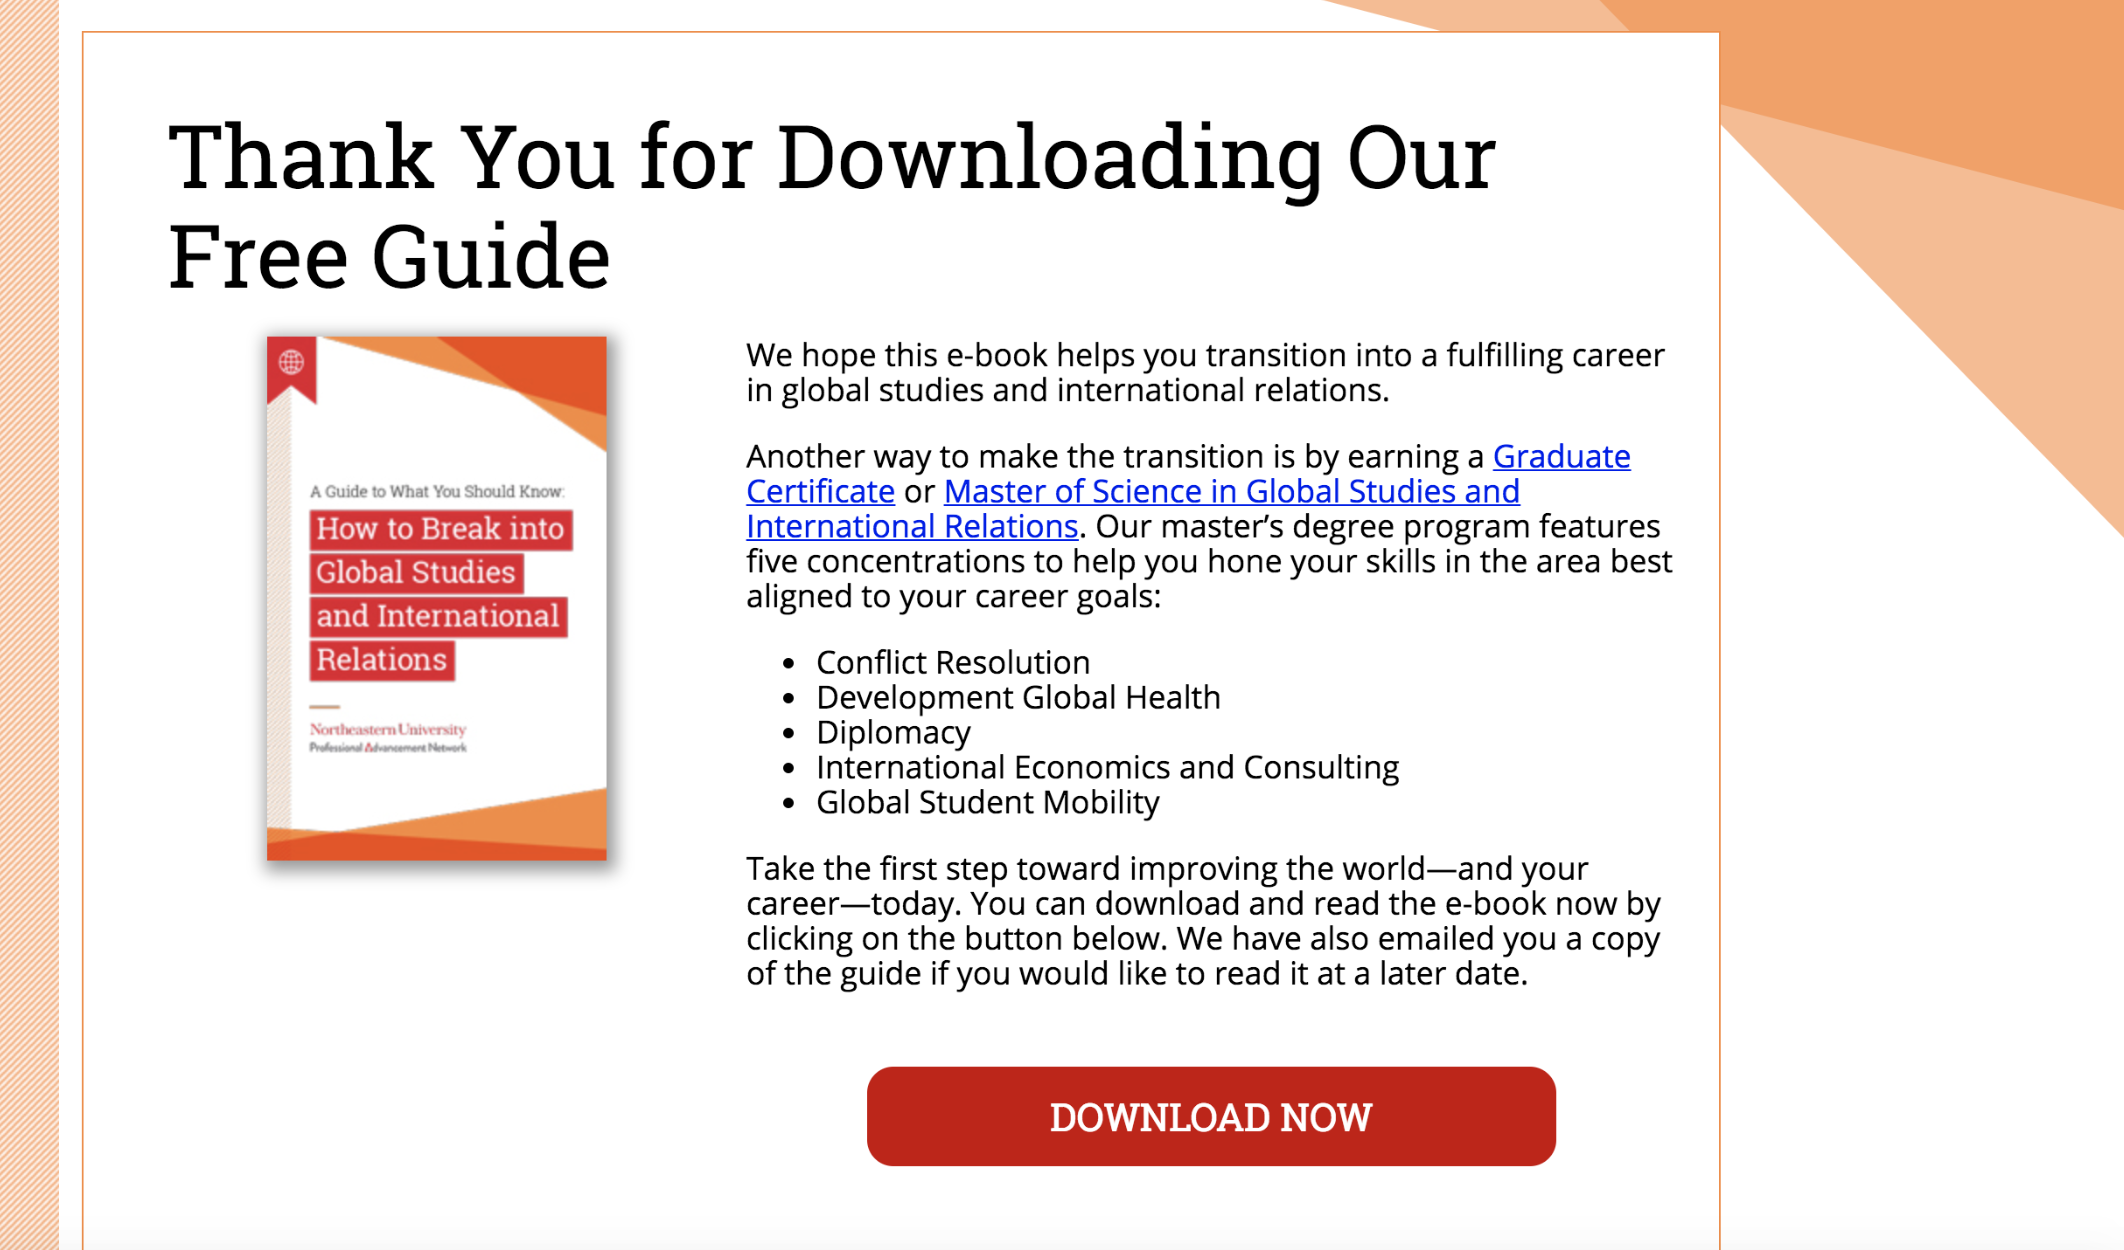 A Thank You page by Northeastern University offering a free guide in the form of gated content